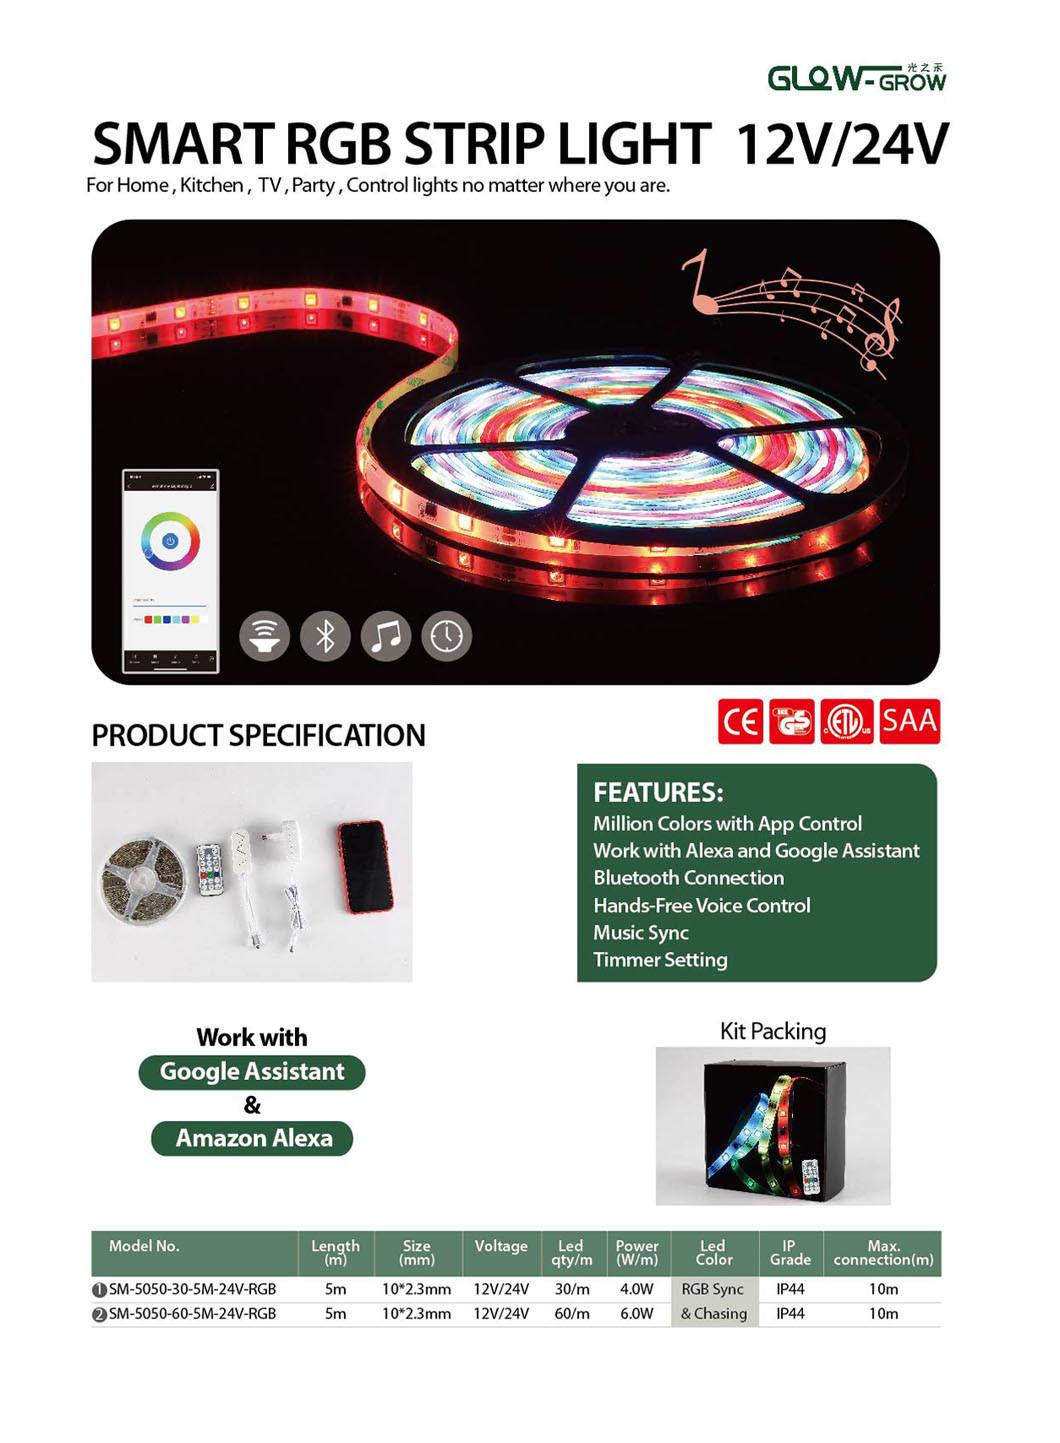 5050 ETL Listed Wedding Use RGB Smart LED Strip Light with Remote, Alexa Google Home Compatible